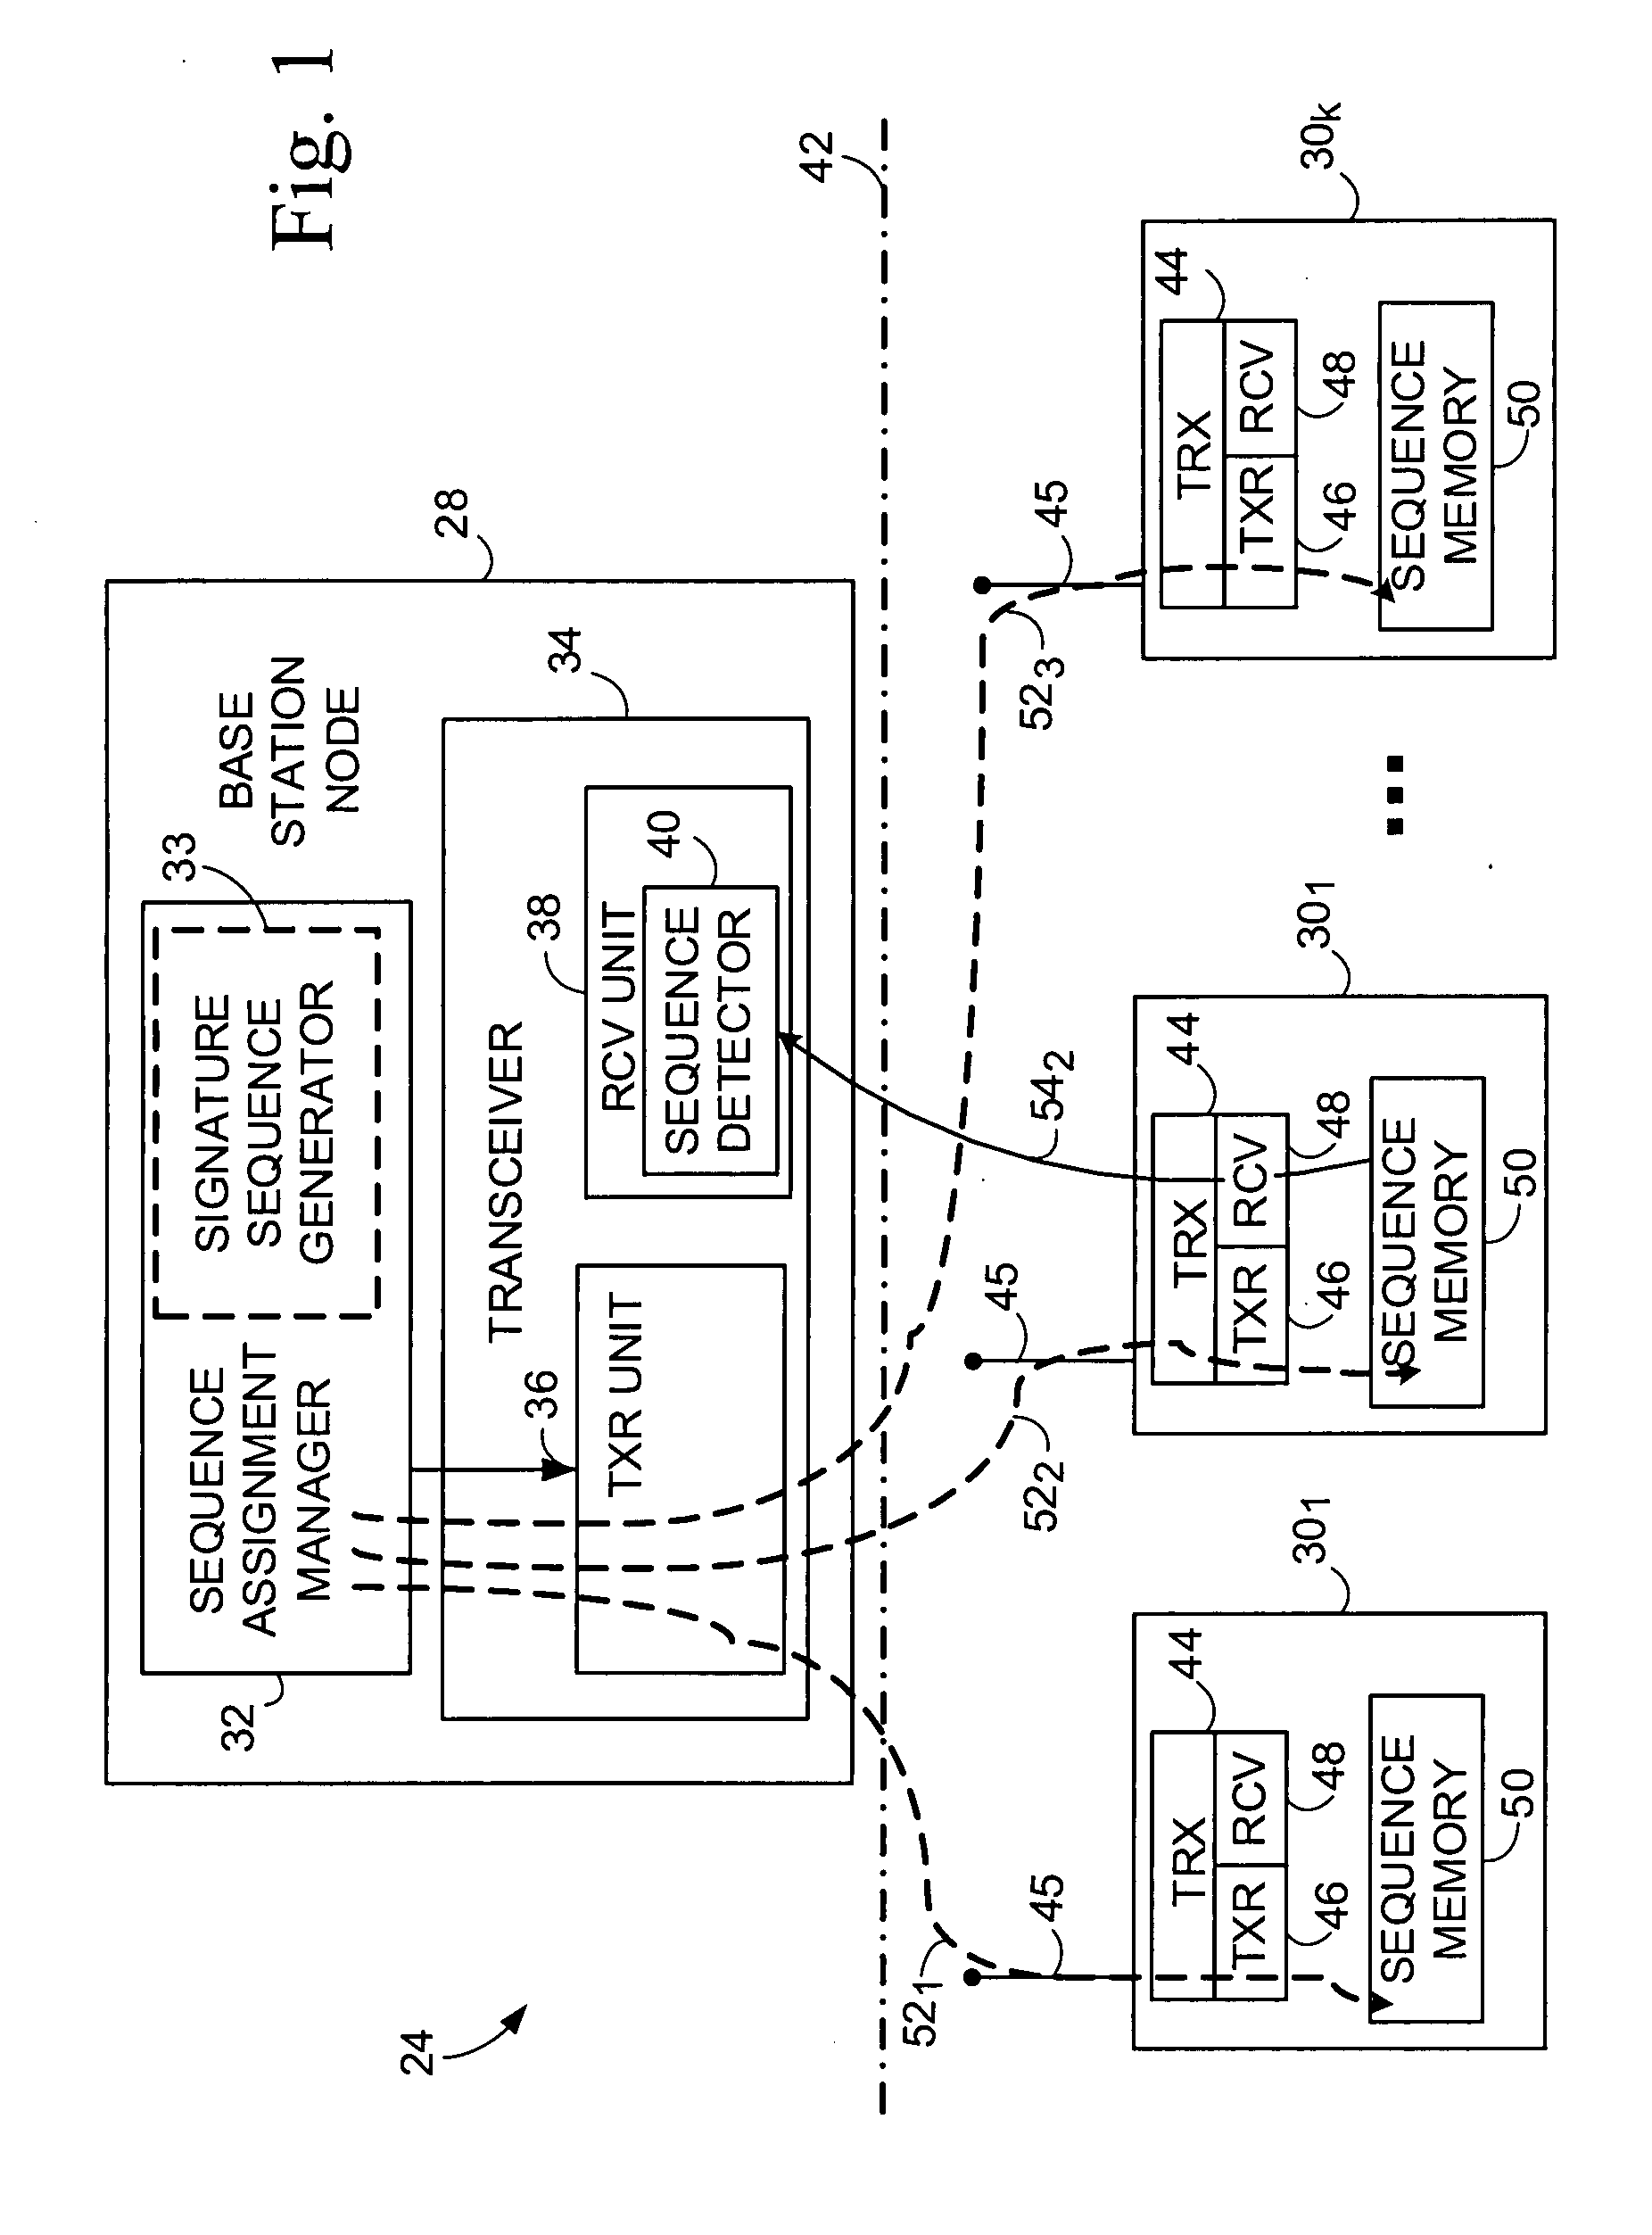 Novel signature sequences and methods for time-frequency selective channel